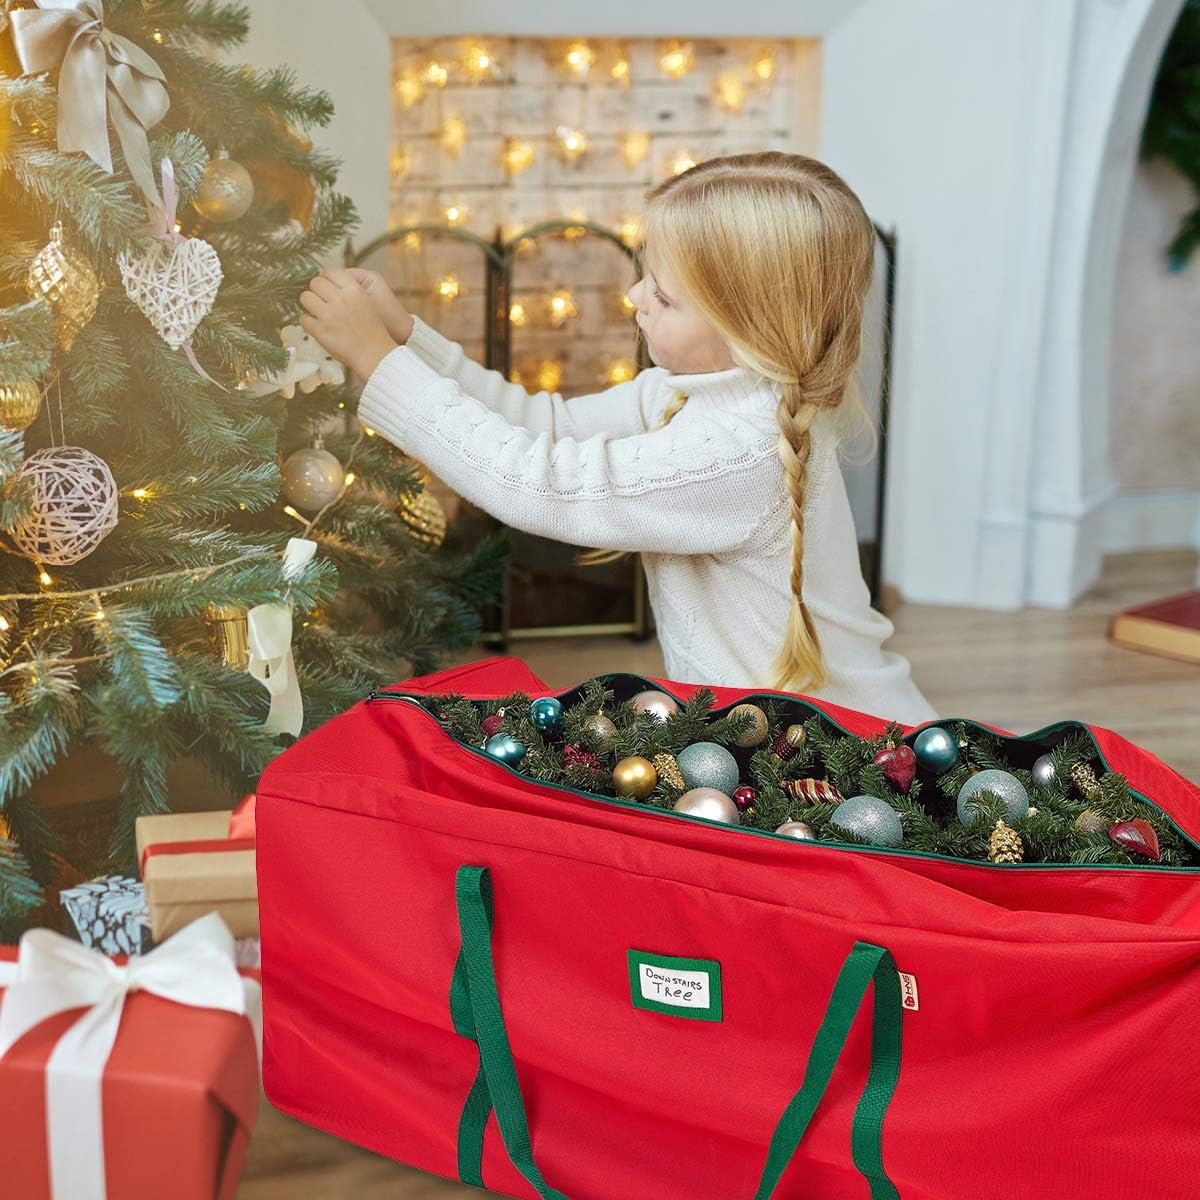 HOLDN’ STORAGE Christmas Tree Bag Heavy Duty 600D Oxford - Christmas Tree Bags Storage Fits Up To 9Ft, Waterproof Storage Bags with Reinforced Handles & Zipper.